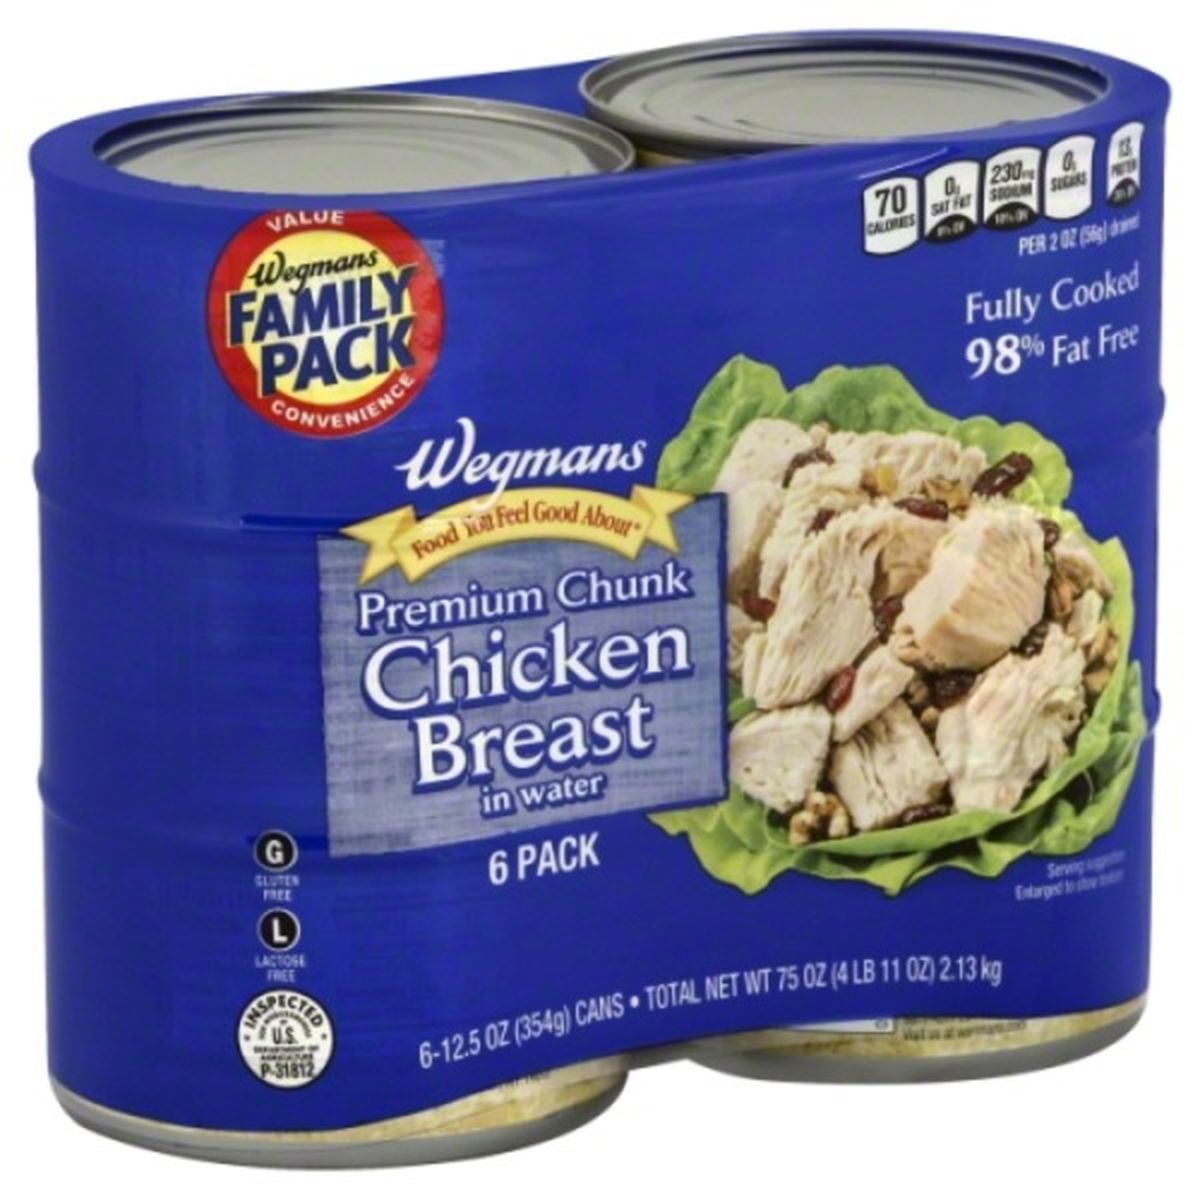 Calories in Wegmans Premium Chunk Chicken Breast in Water, FAMILY PACK